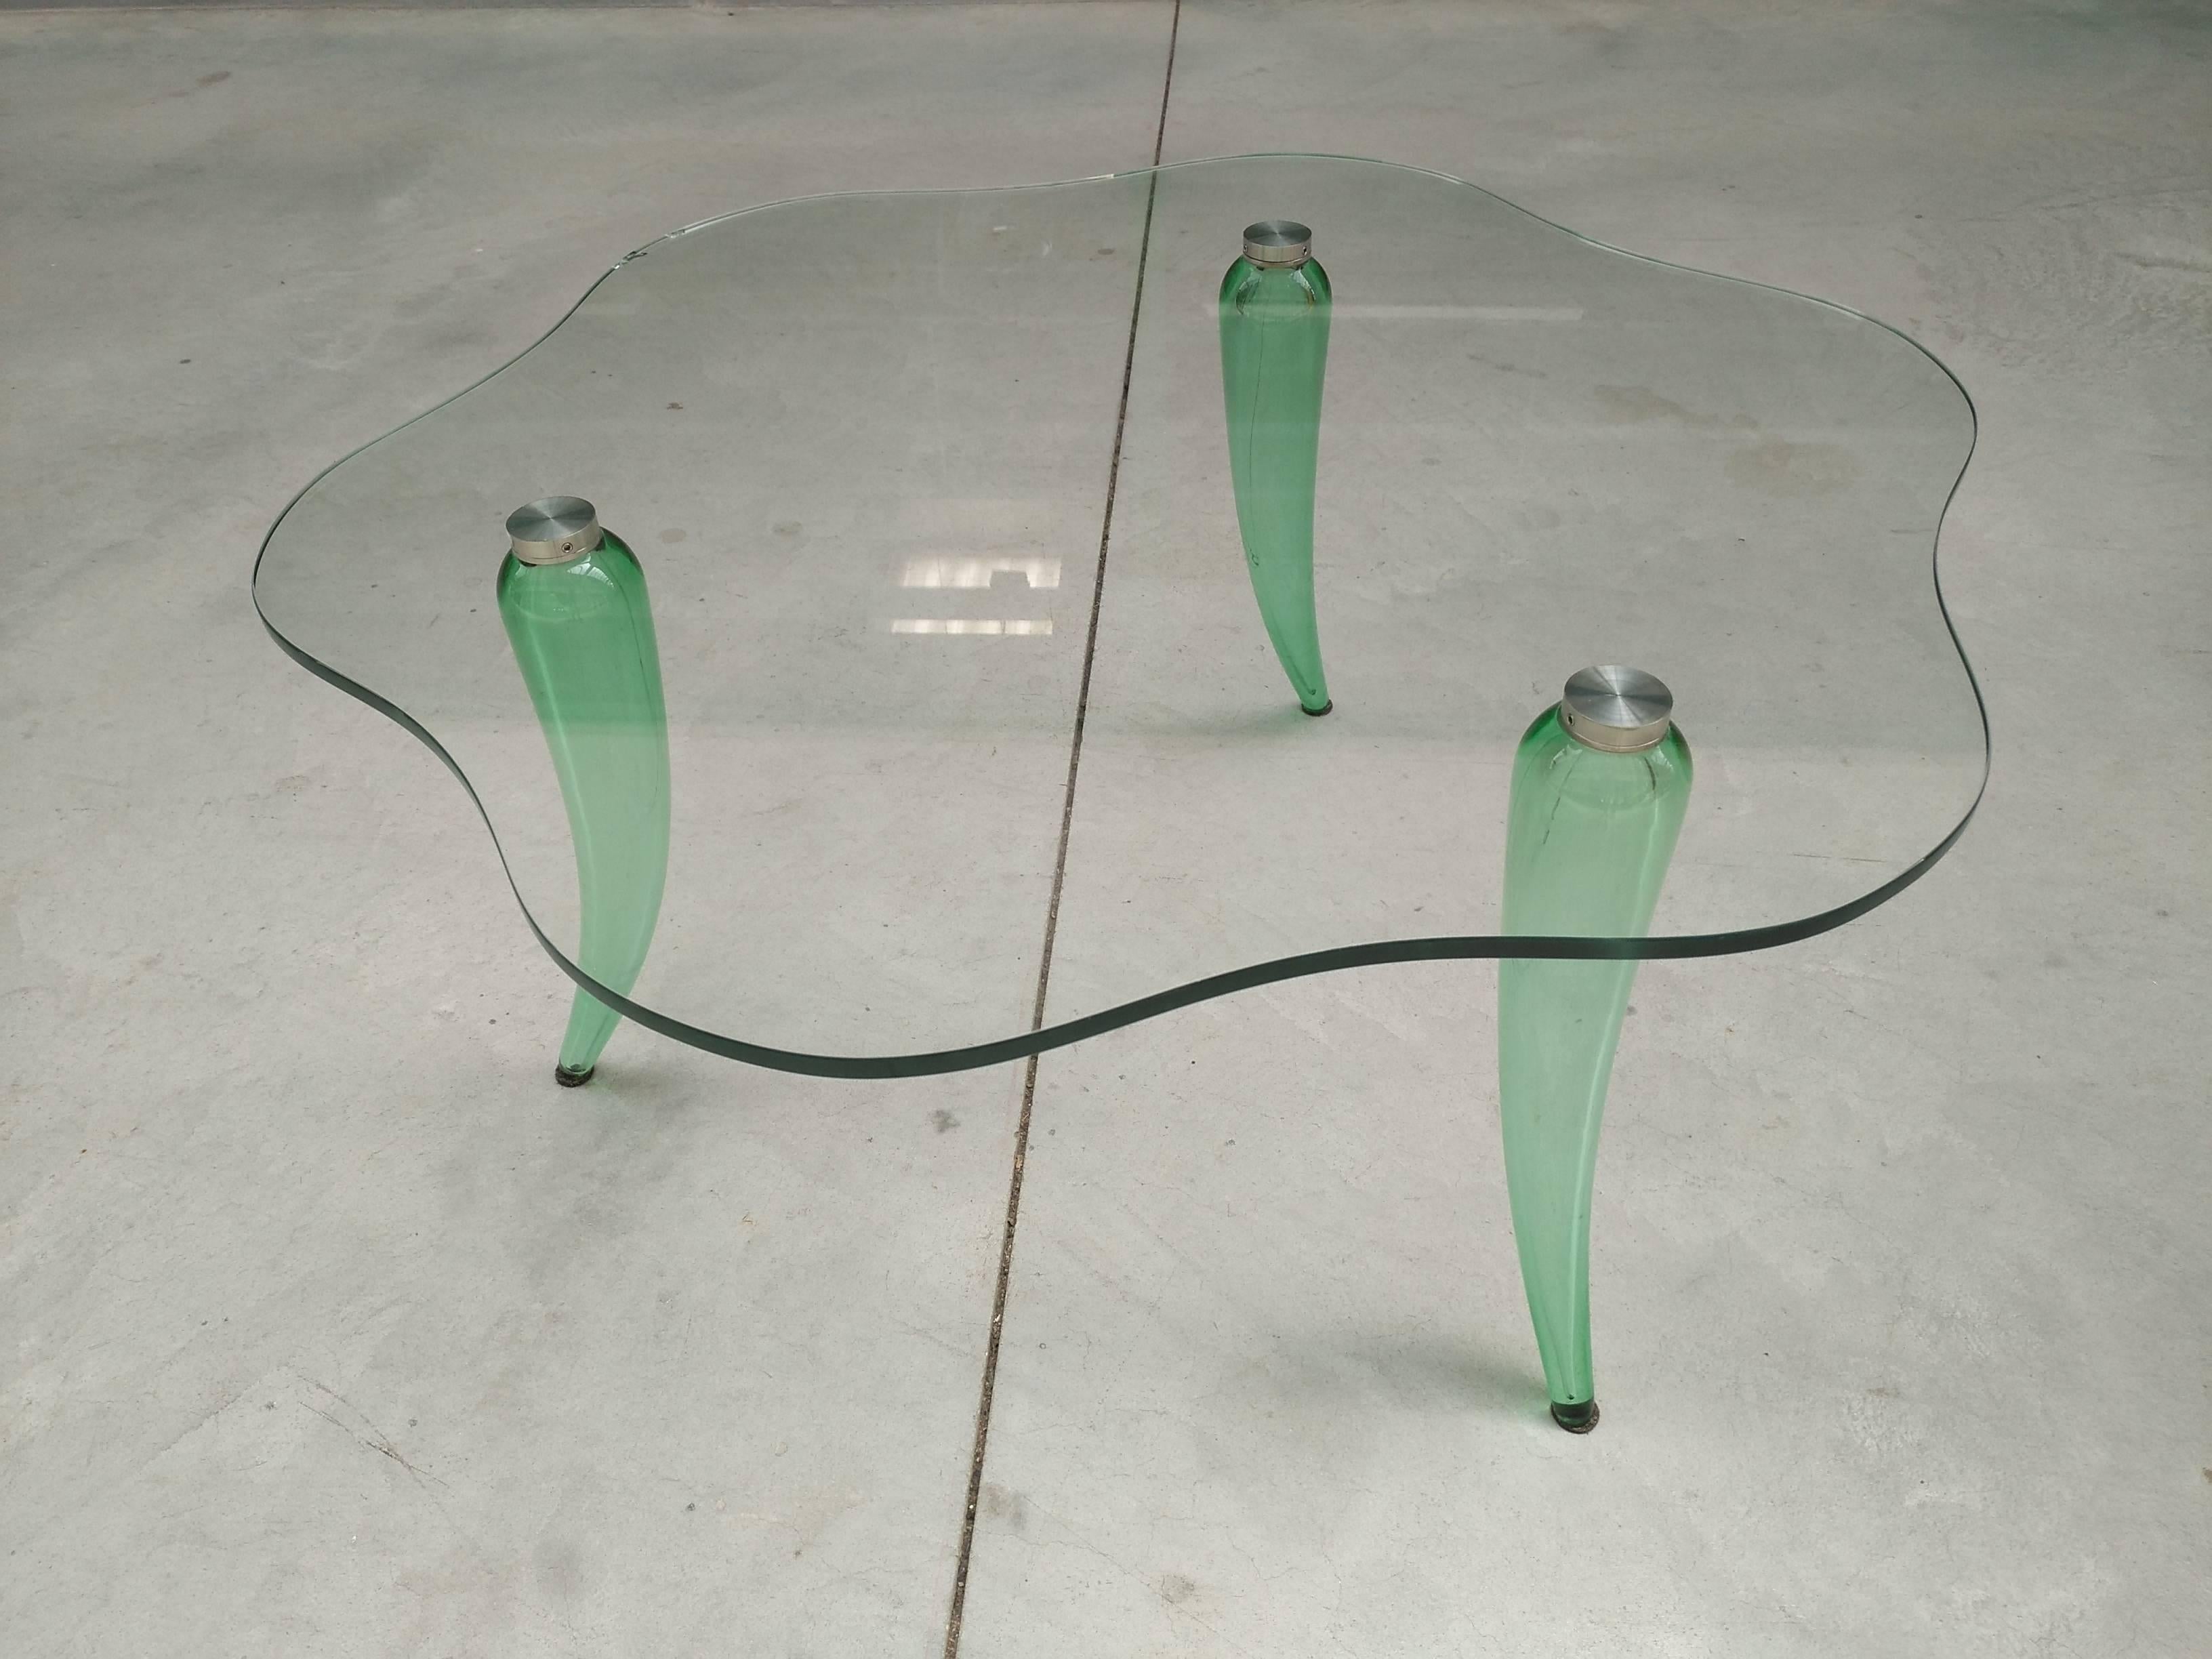 Nice coffee table with green glass legs surmounted by a glass top flower shaped, beautiful design and color
Manufactured by Seguso in 1980.